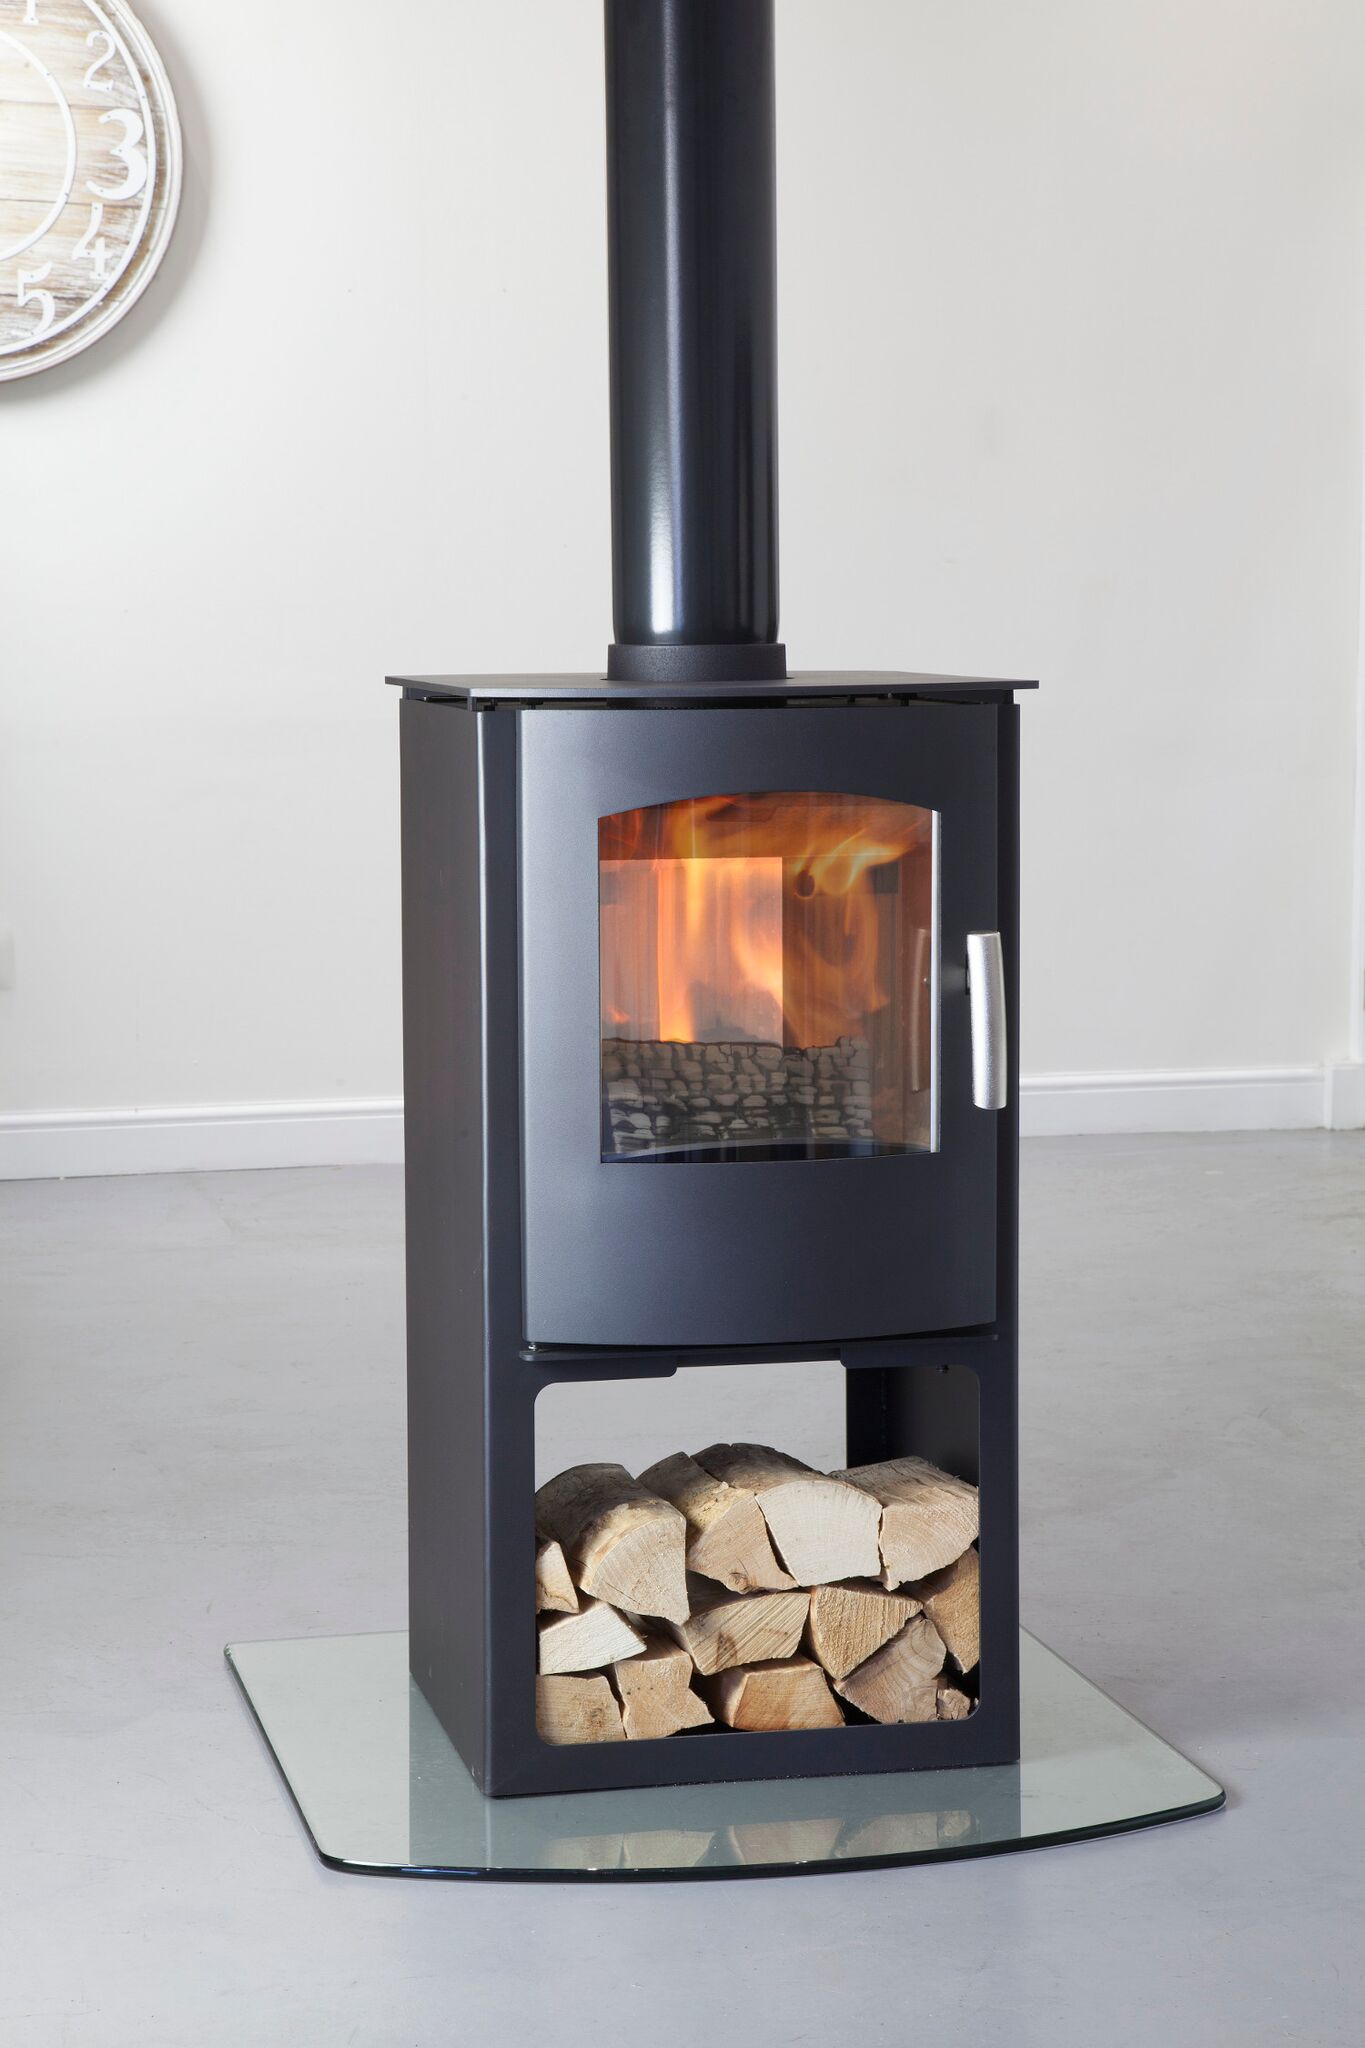 freestanding, granite hearth, slate hearth, woodburning, multifuel, Bangor, Newtownards, Belfast, Holywood, Conlig, Stove yard, Fireplaces, flue pipe, hearths, room heater, wilsons, Portaferry, Kircubbin, Greyabbey, riven slate, wooden beans, fireplace beams, fire chambers, open fires, logs, coal, grates, stove glass, grate bars, ards fireplaces, Jubilee Road, Helensbay, Crawfordsburn, flexi flue, chimney cowls, down draught cowls, gas, natural gas, reflex 75T, log effect fire, Gazco, stovax, medip, arada, varde, Henley, hunter, yeoman, glass hearths,